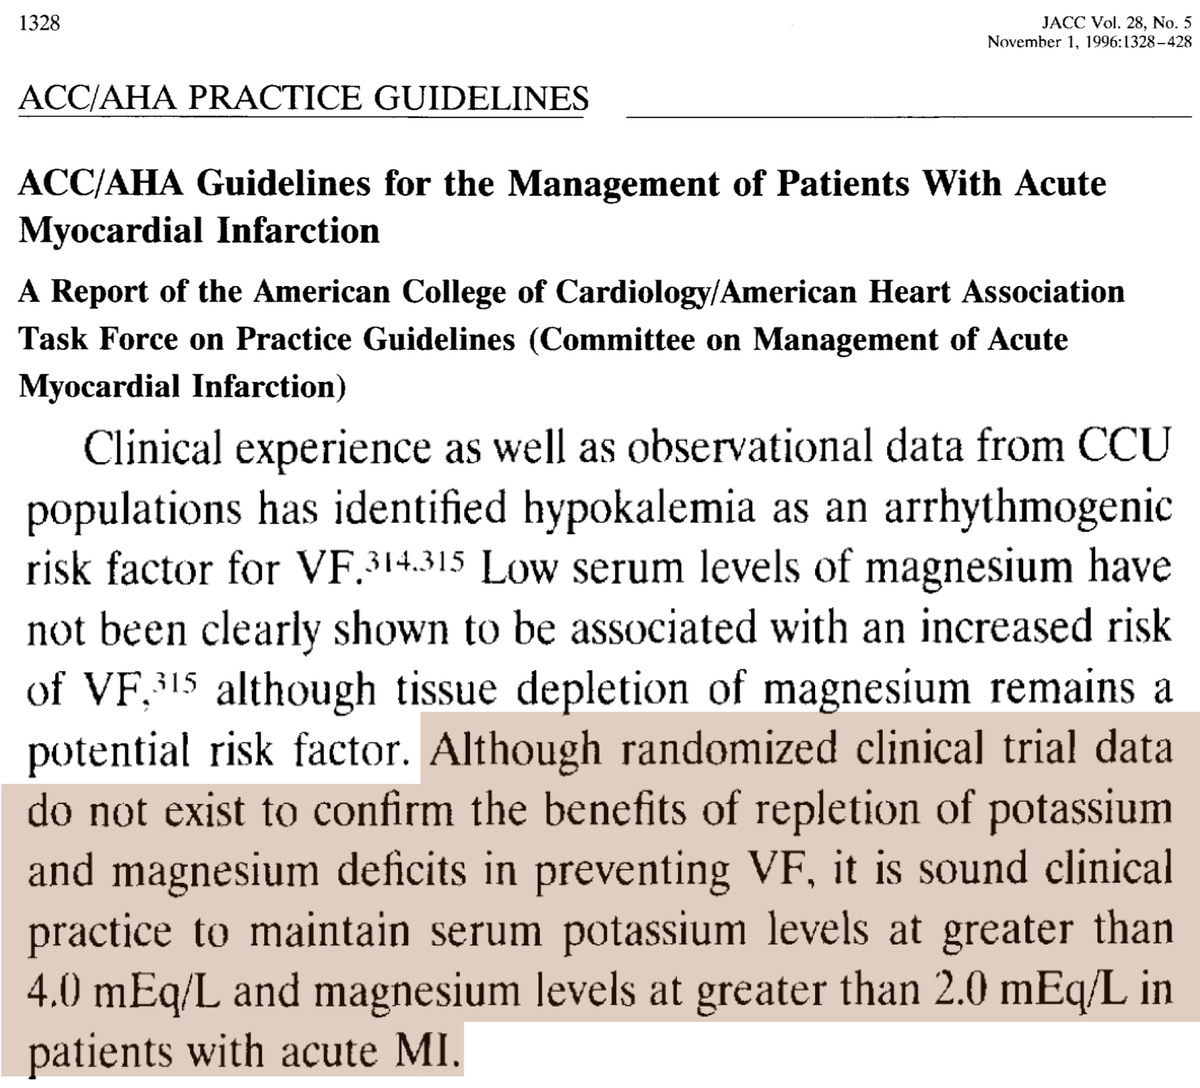 6/Because we don't have RCT data supporting or refuting the benefit of repleting patients with AMI to a particular value, early guidelines generally erred on the side of caution and suggested we keep patients above 4.This is an example from 1996. https://www.ncbi.nlm.nih.gov/pubmed/8890834 